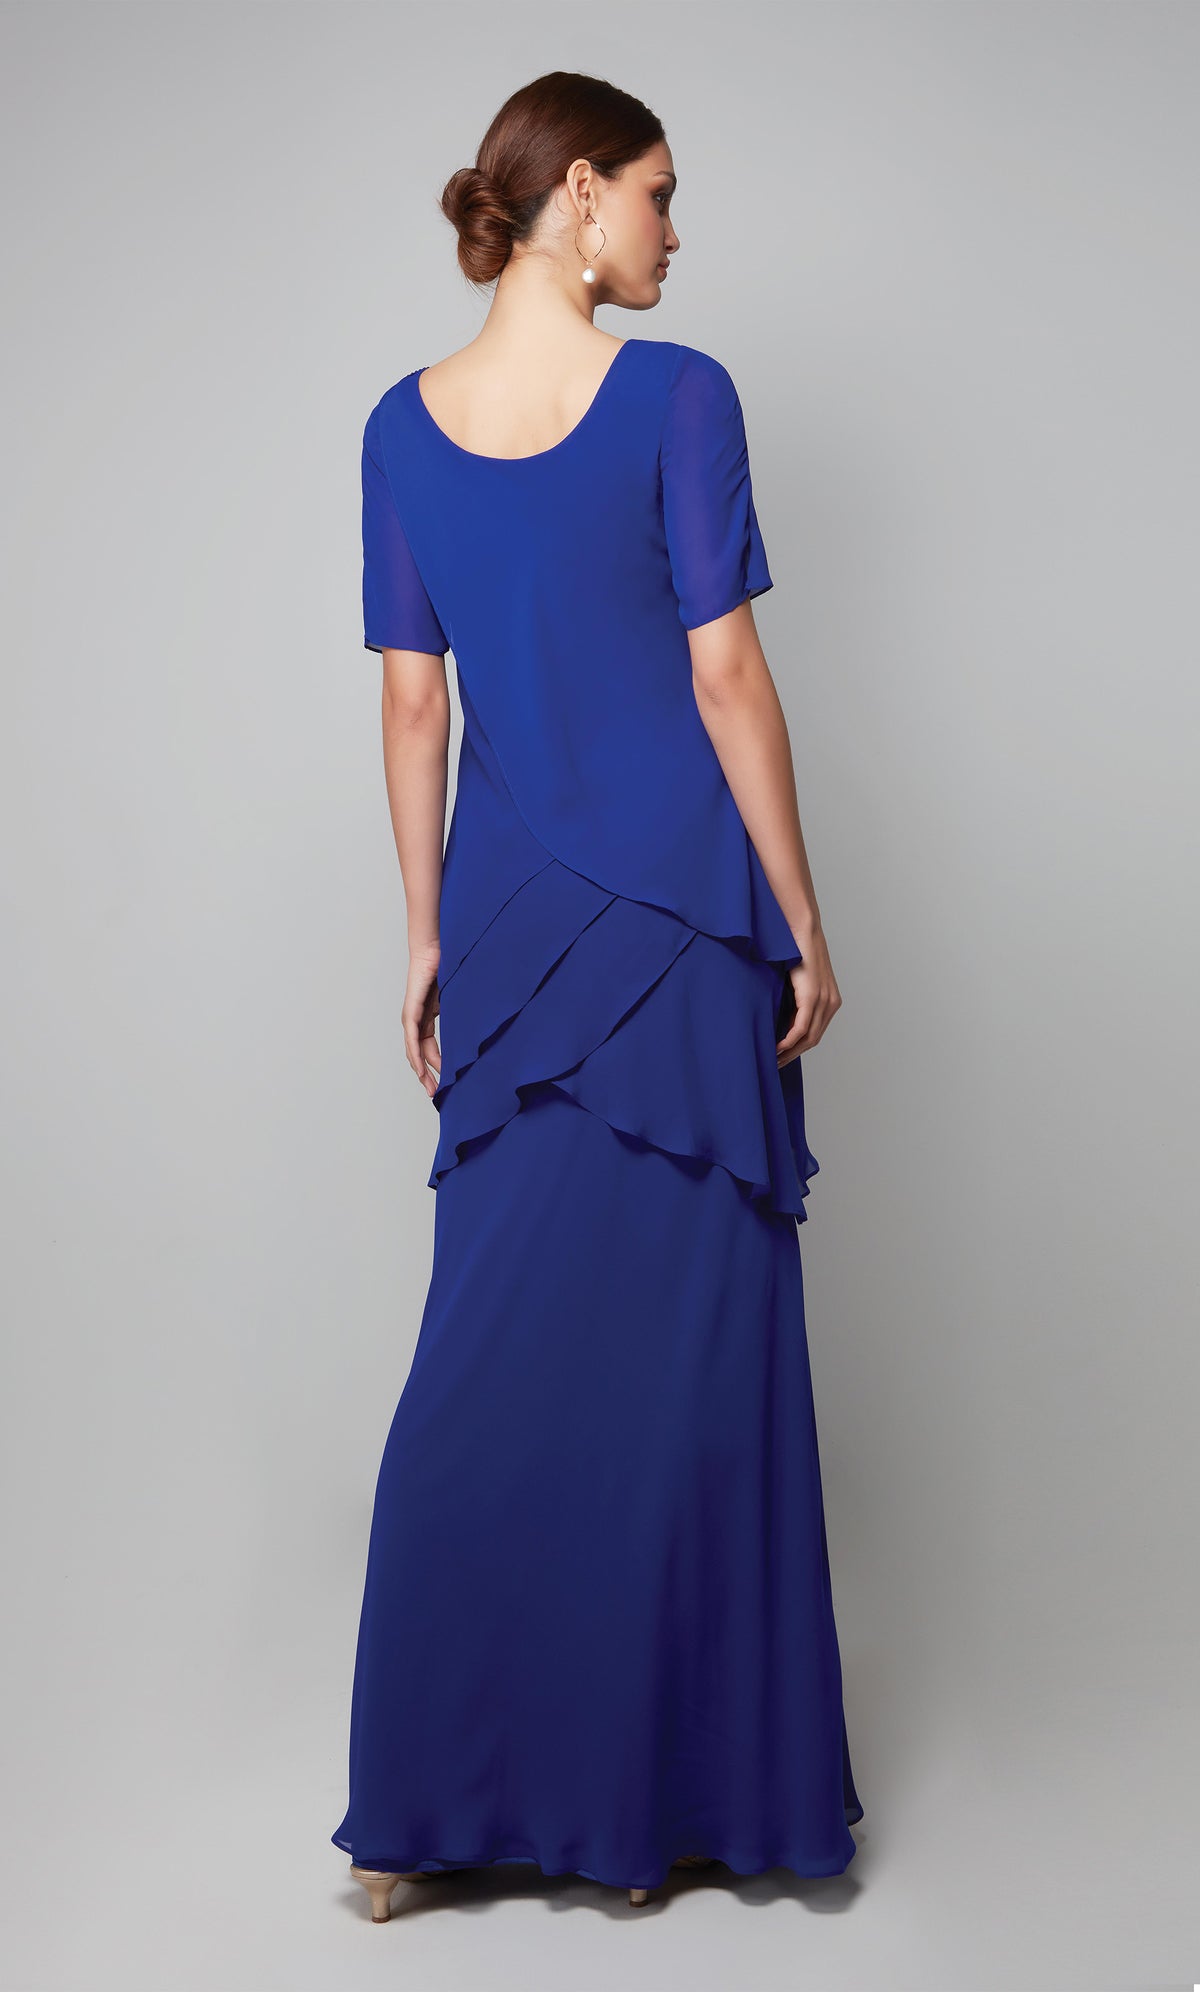 Chiffon elegant guest of wedding dress with a closed back and short sleeves in cobalt blue.